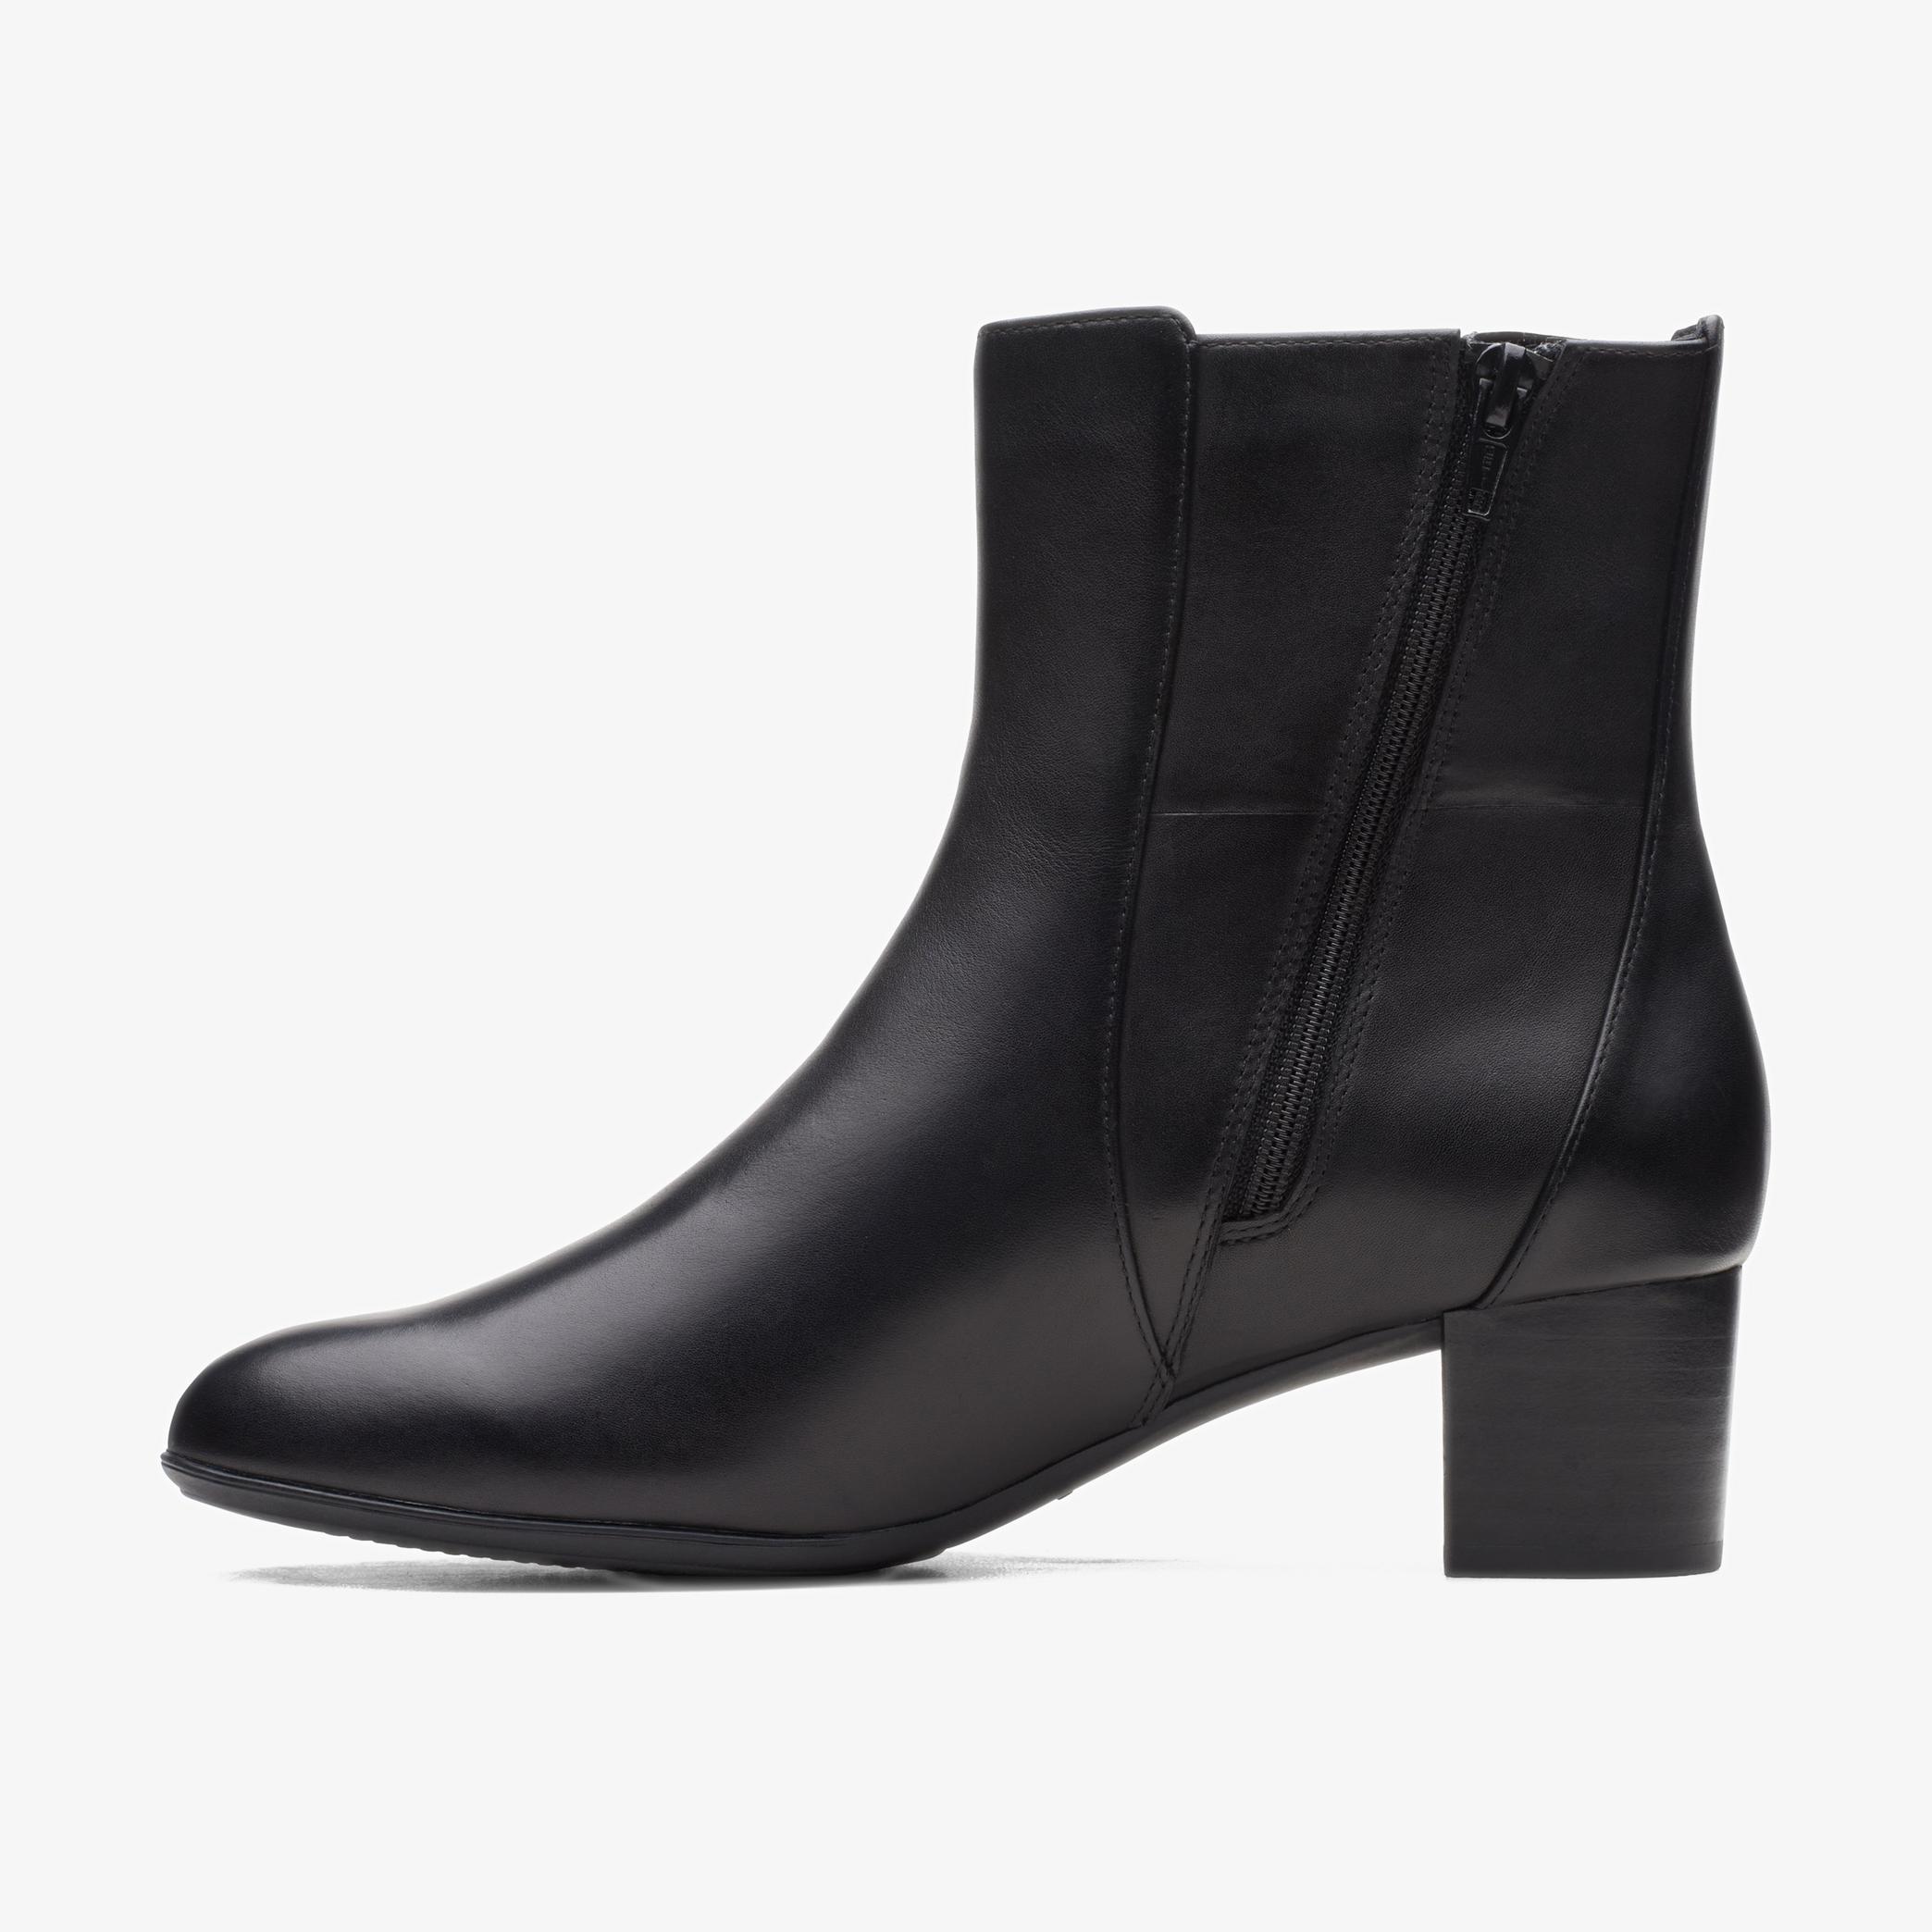 Linnae Up Black Leather Ankle Boots, view 2 of 6